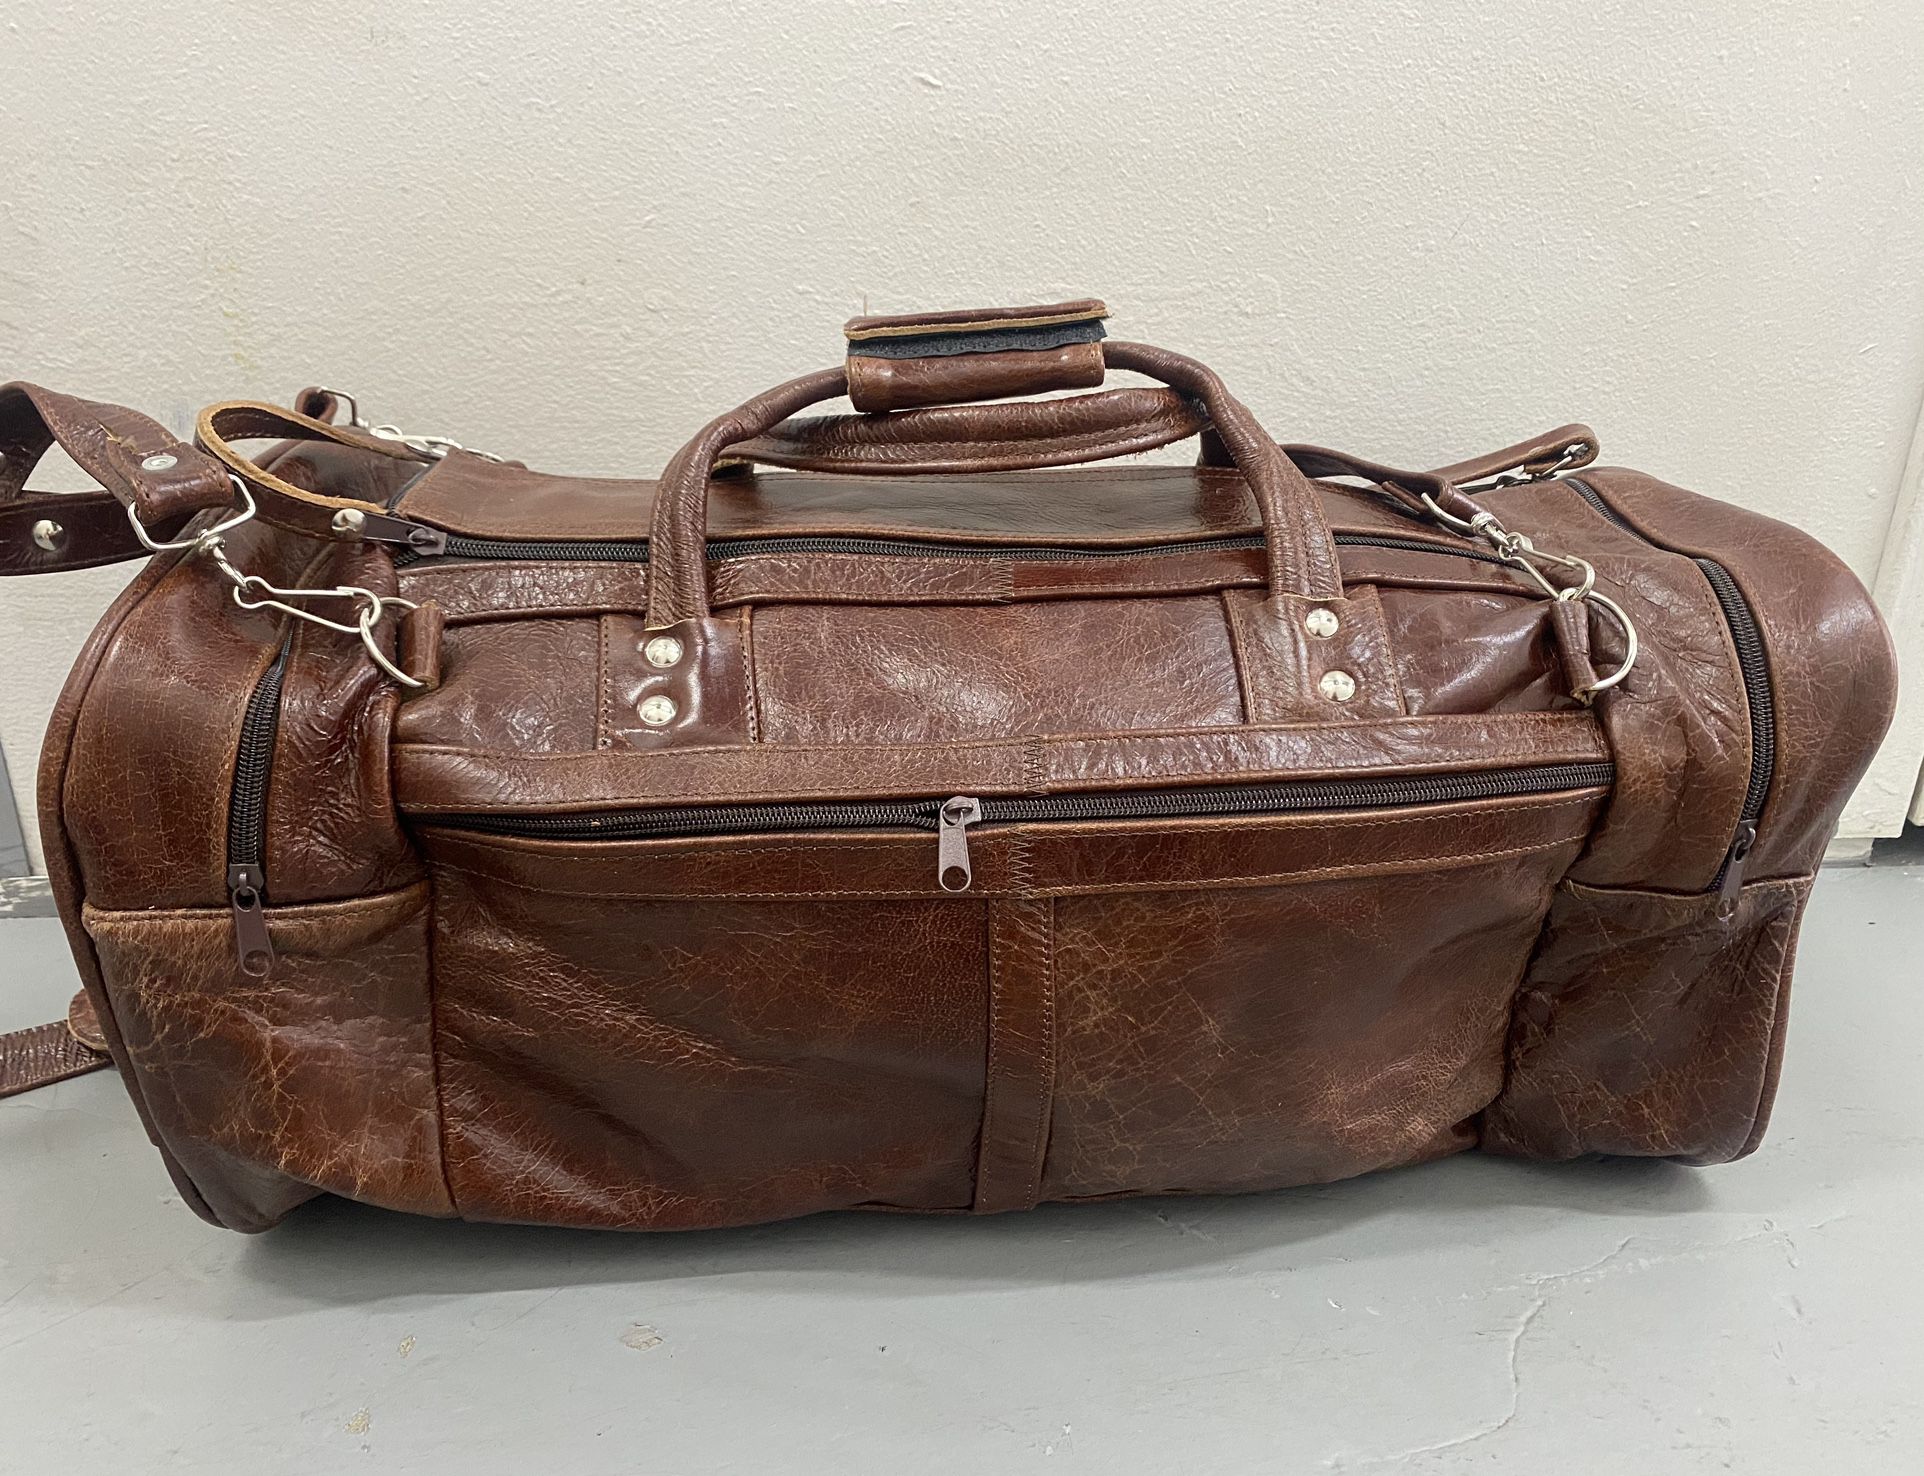  21" Genuine Leather Travel Tote Duffel Bag Carry-on Weekender Luggage Mexico 